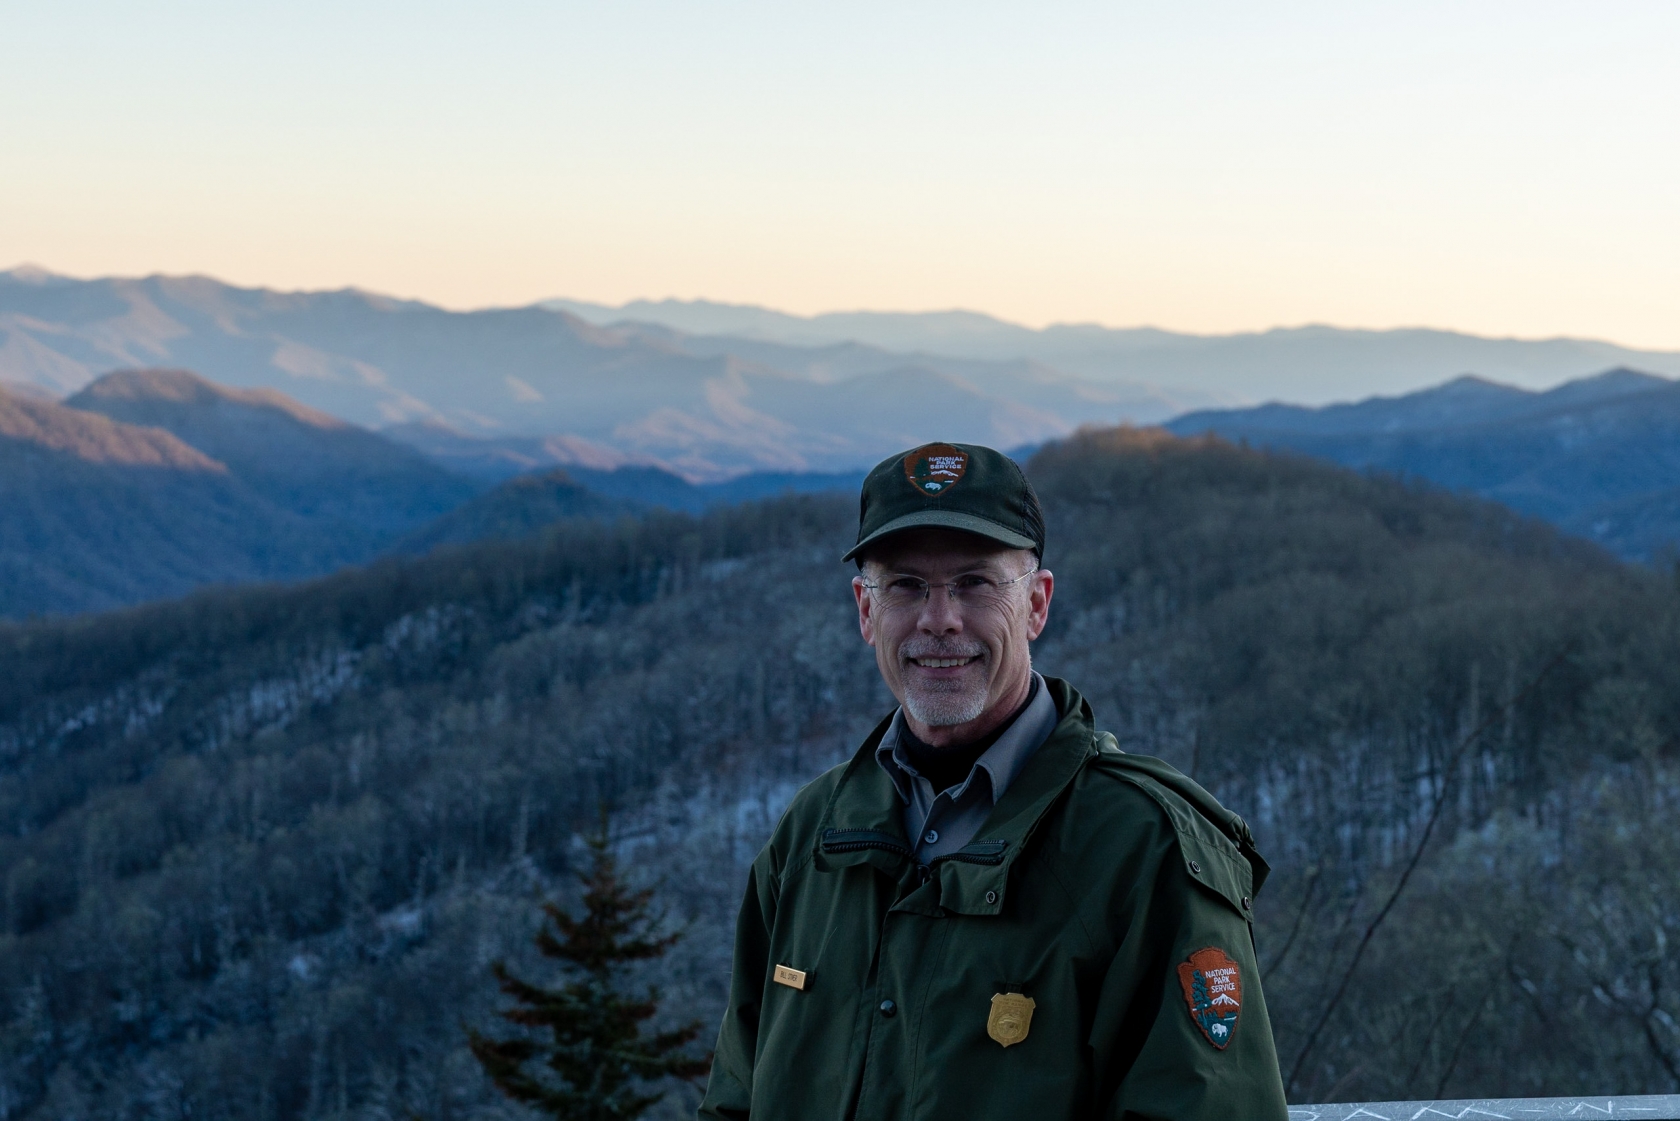 Bill Stiver in Great Smoky Mountains National Park